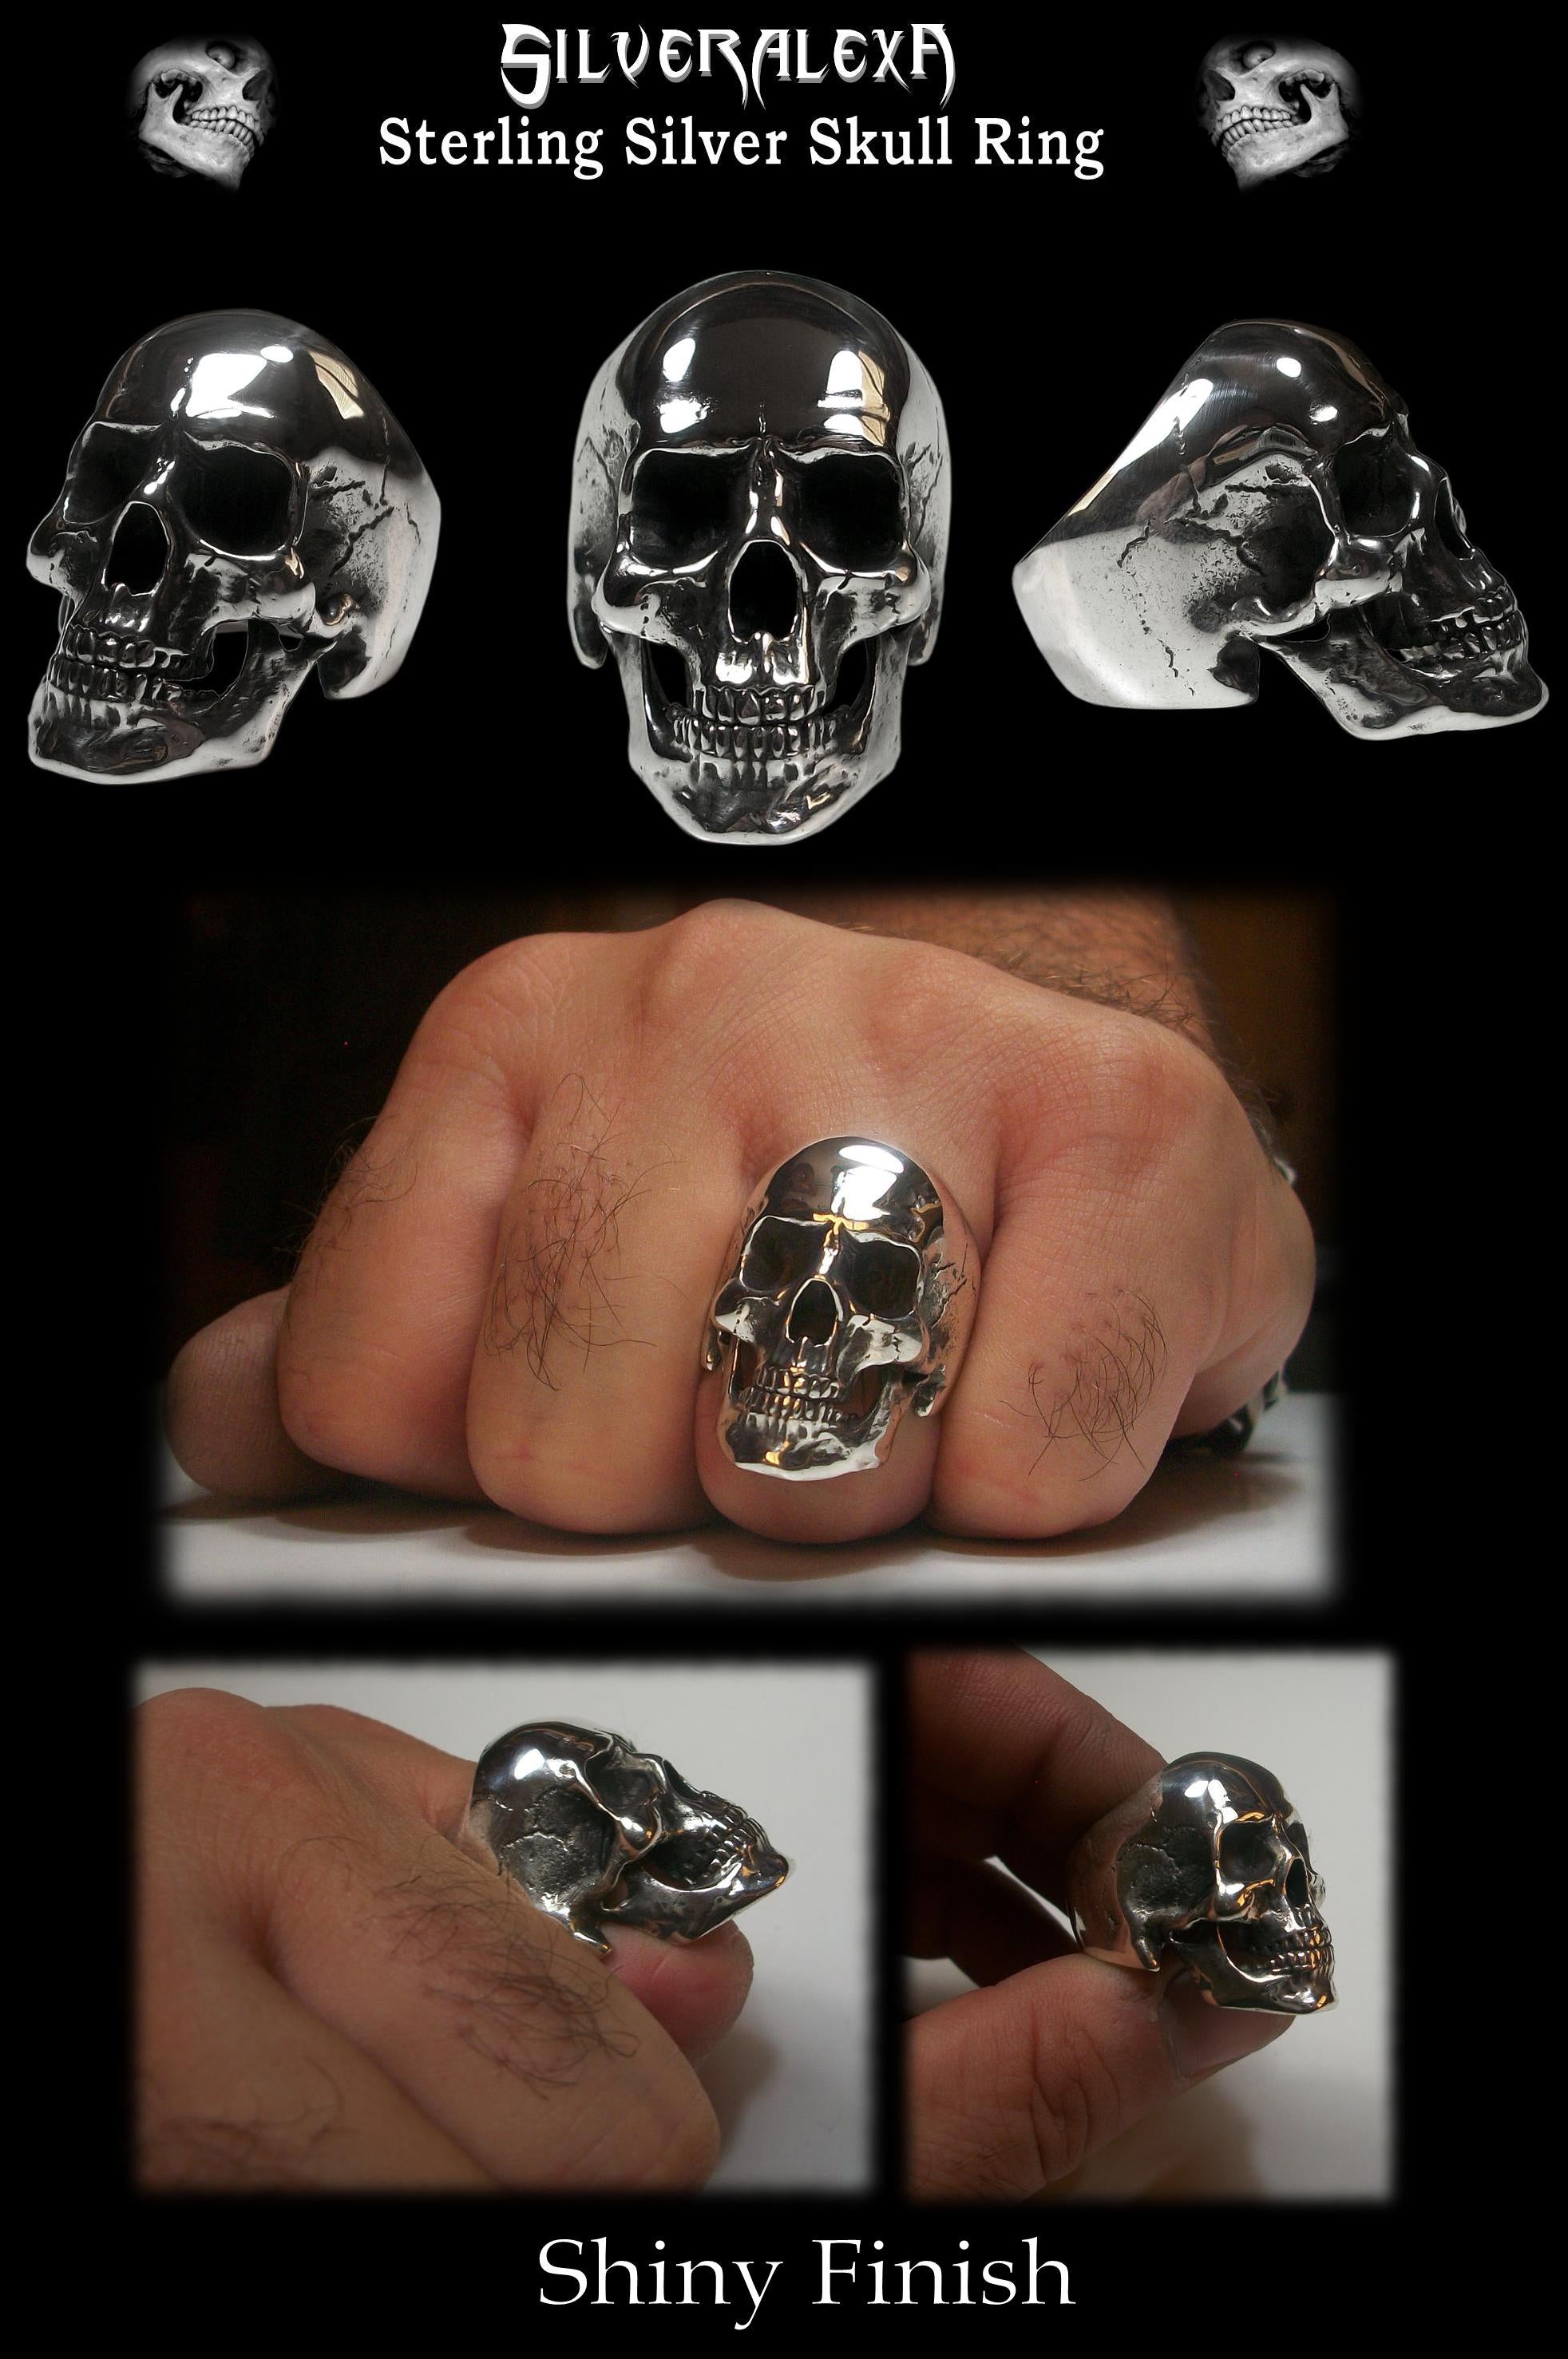 Silveralexa Sterling Silver Anatomical Skull Ring with Jaw Sapphire Eyes